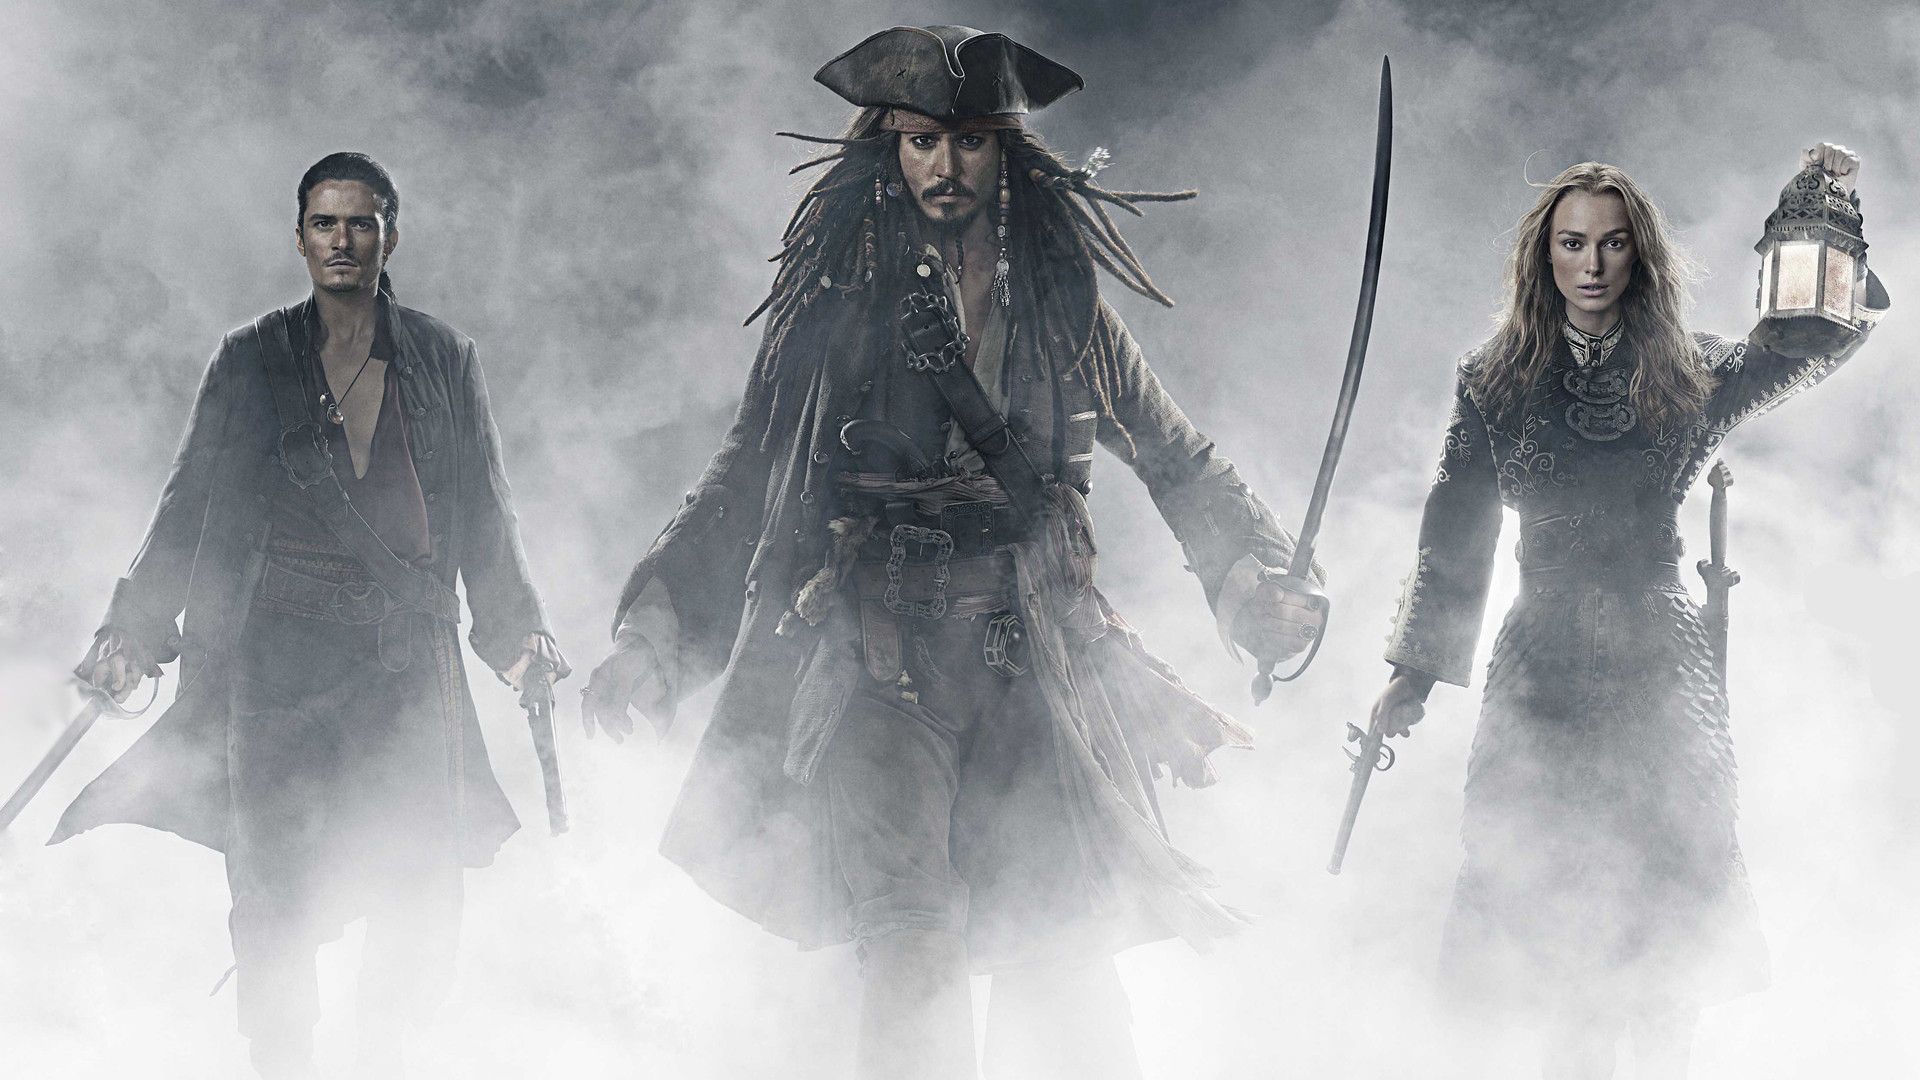 Pirates Of The Caribbean HD Wallpaper Background 1280×1024 Pirates Of The Caribbean Background 2. Pirates of the caribbean, Movie art, Jack sparrow wallpaper